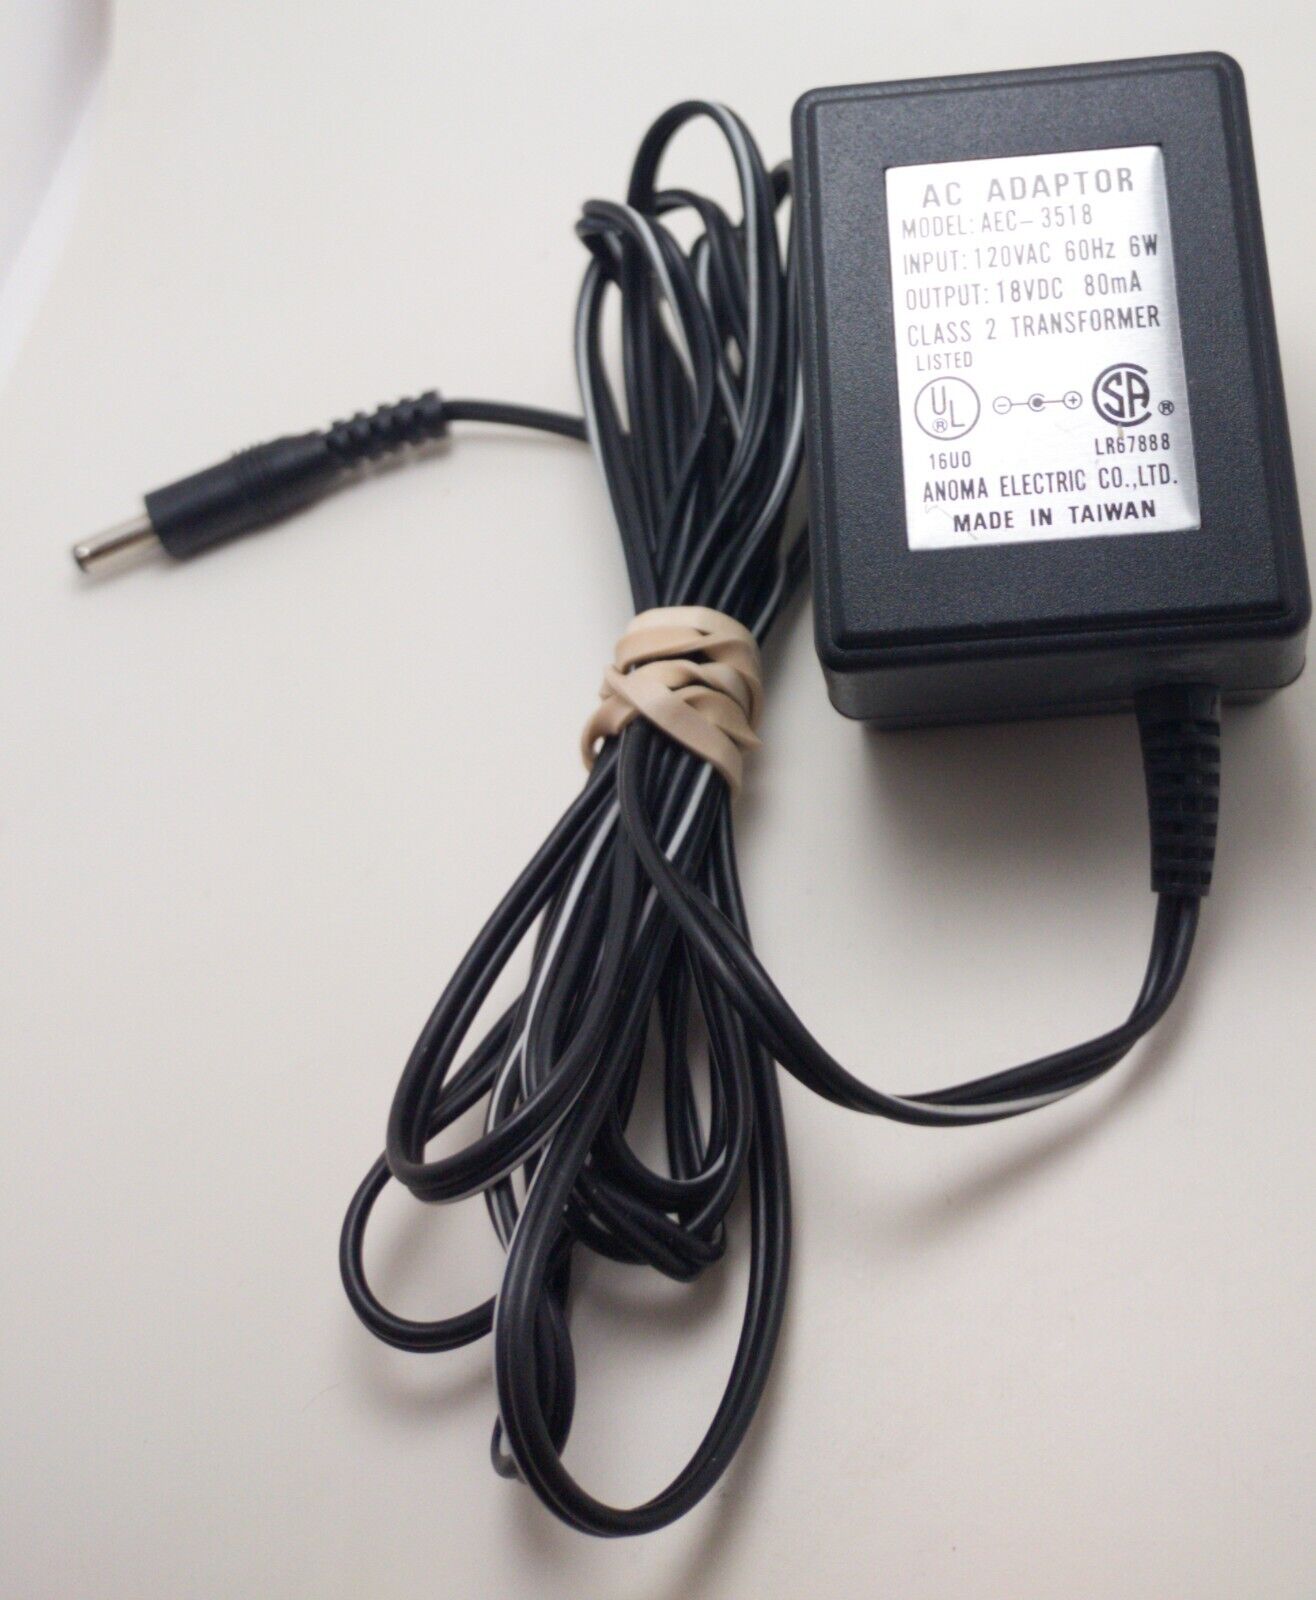 *Brand NEW*IN:120VAC/60Hz/6W OUT:18VDC/80mA ANOMA AC ADAPTOR AEC-3518 CLASS 2 TRANSFORMER POWER Supp